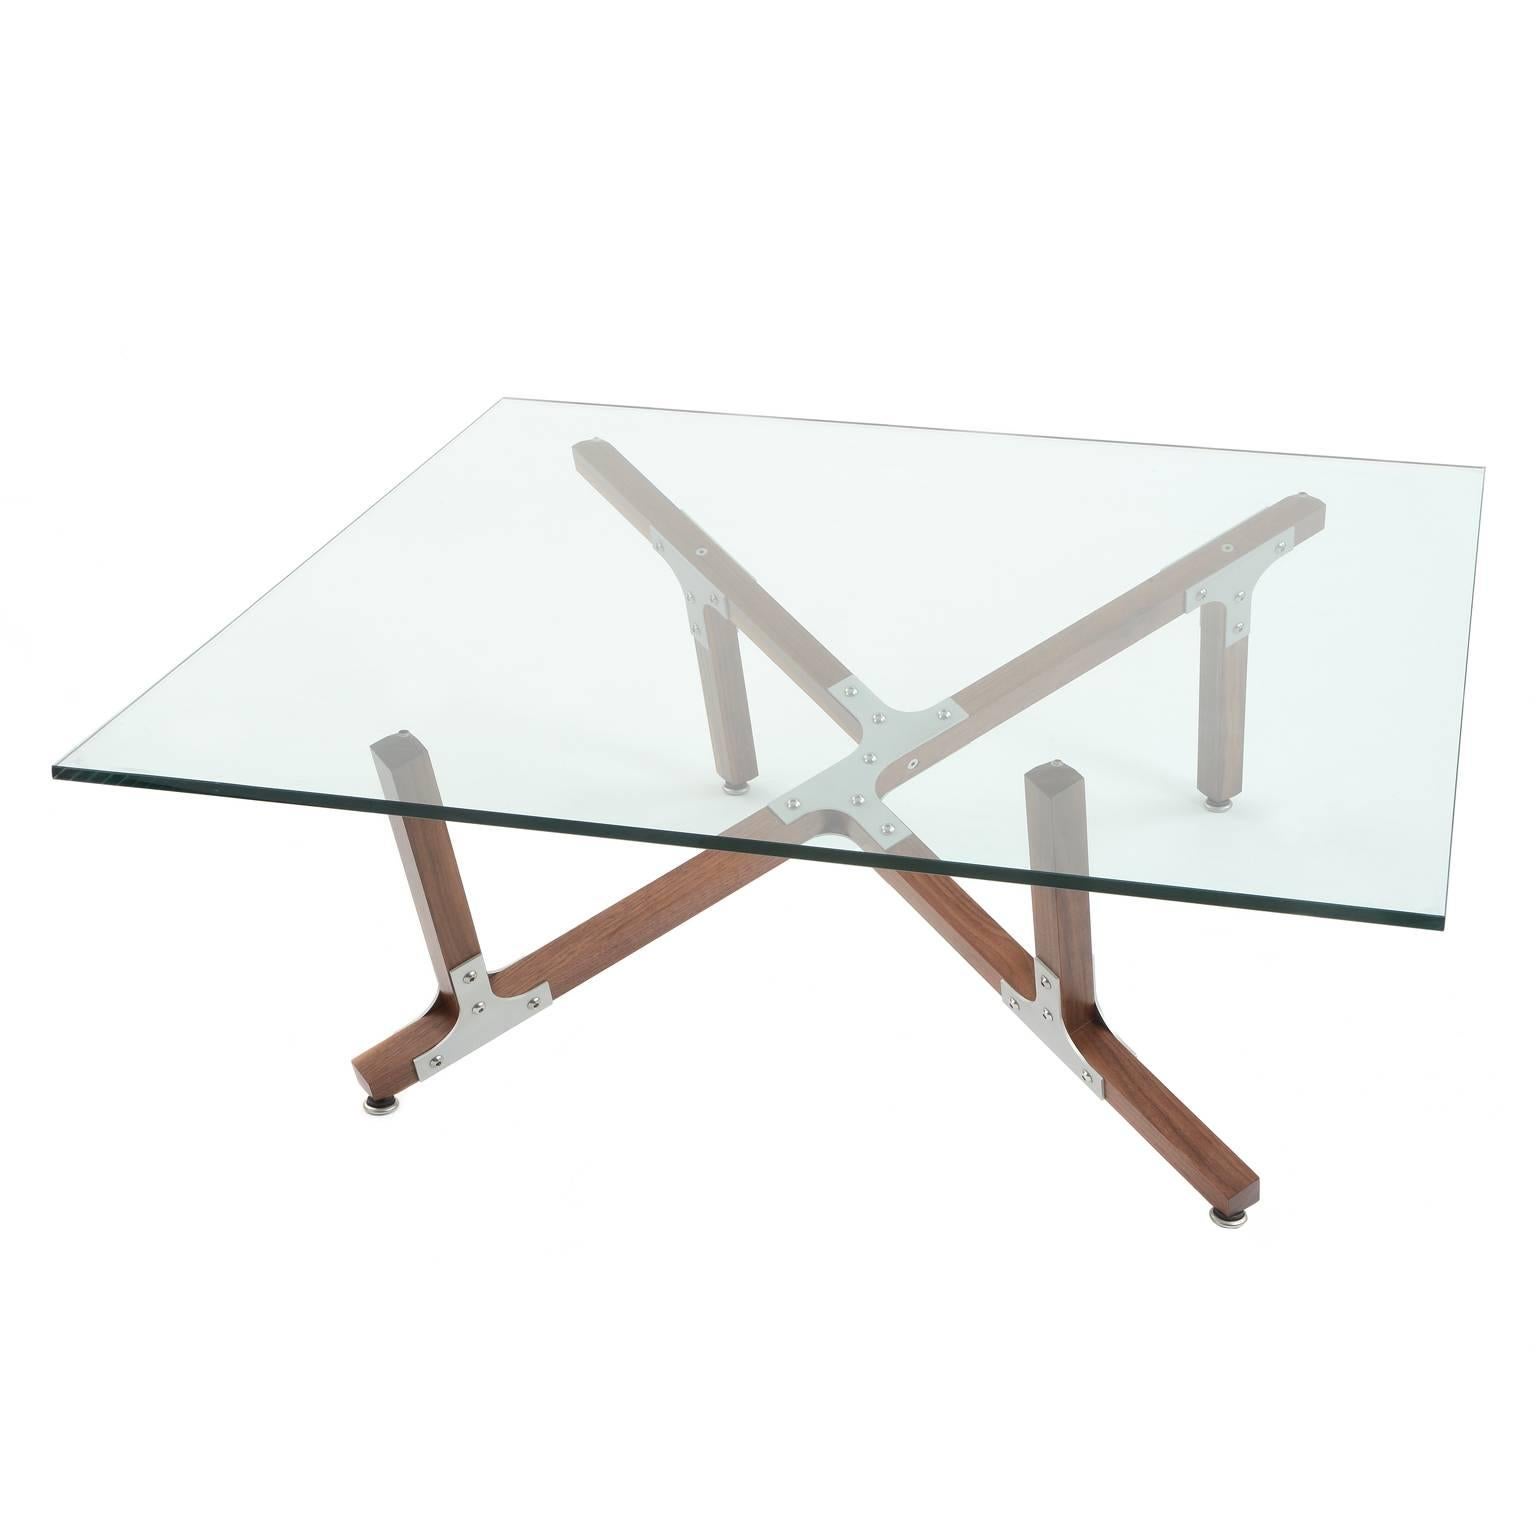 Modern Industrial Coffee Table by Peter Harrison. Square Glass, Metal, Wood